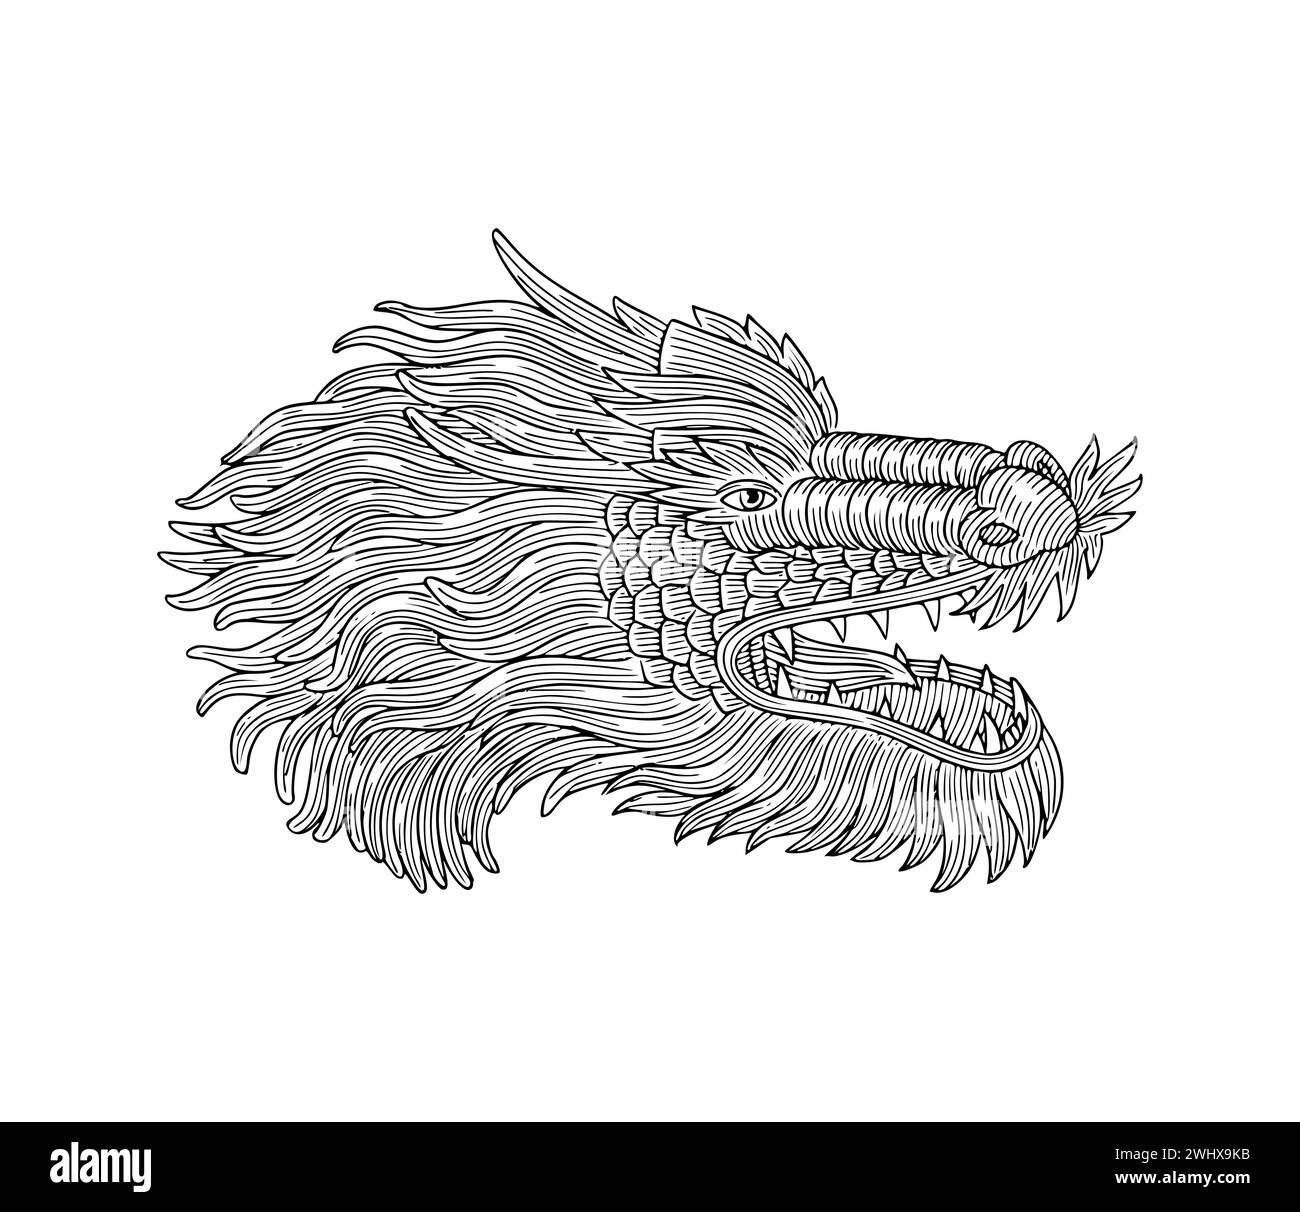 Angry dragon head with wings, vintage engraved drawing style illustration Stock Vector